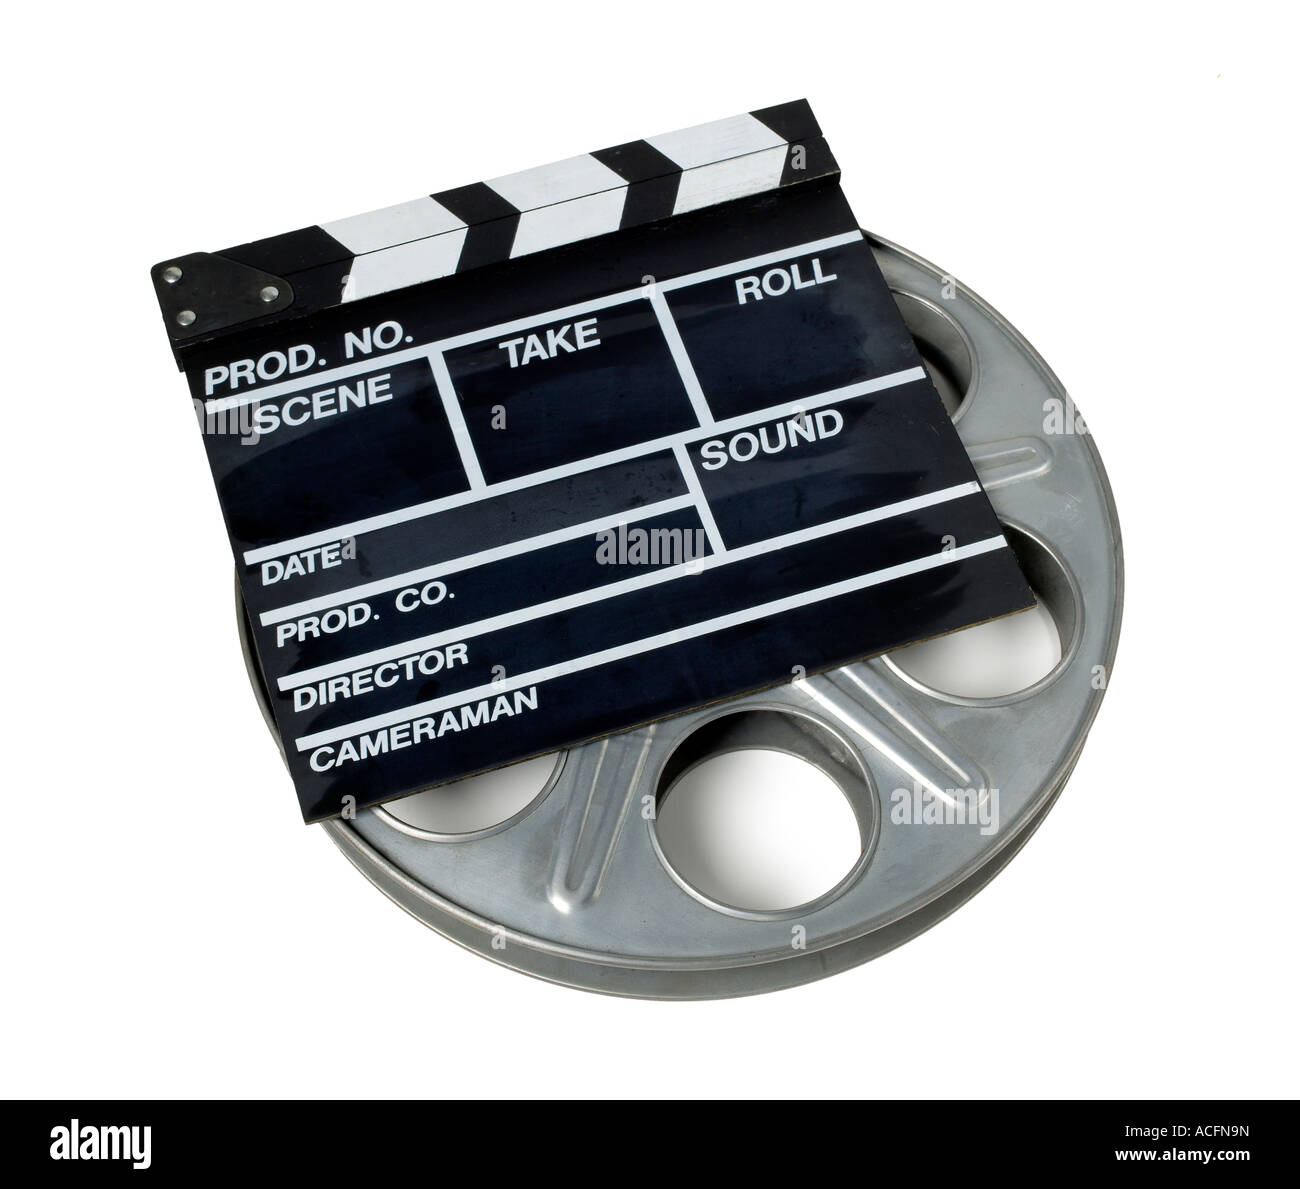 Movies Reel Film elevated view Stock Photo